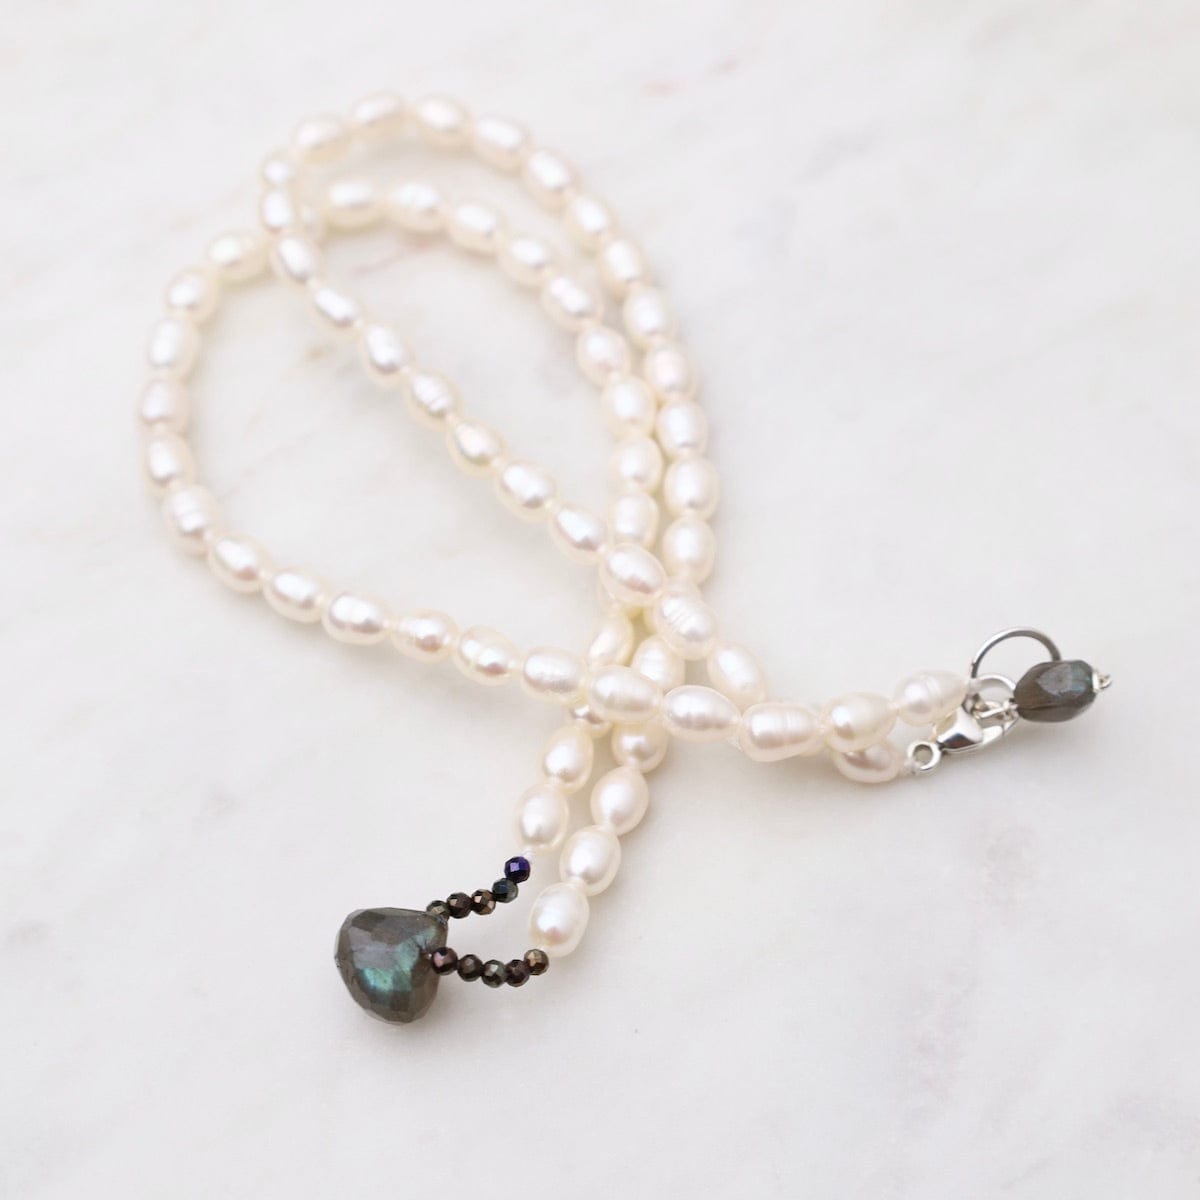 NKL White Pearl with Labradorite Drop Necklace